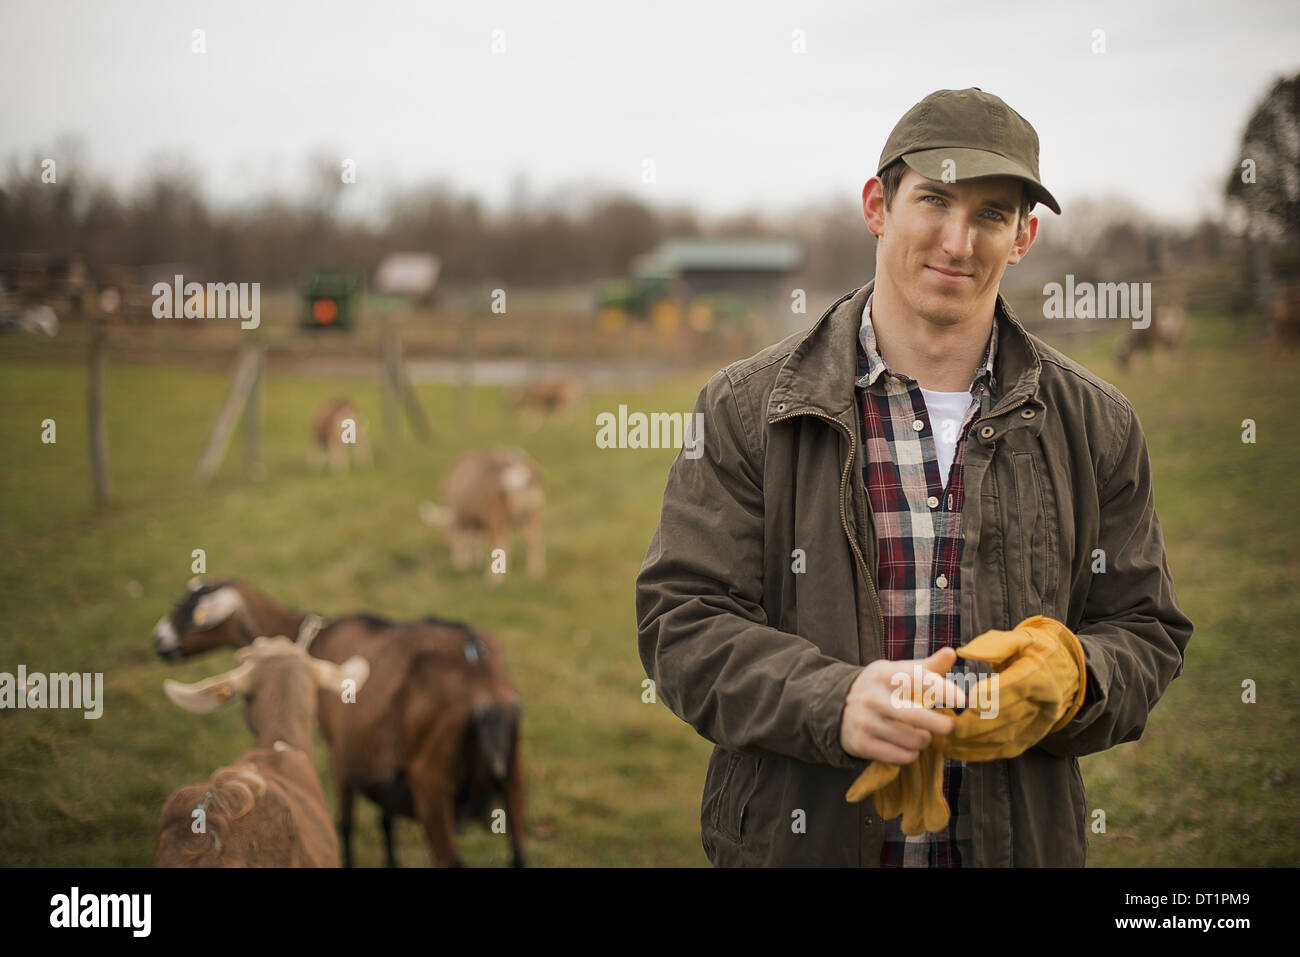 Dairy Farm Farmer working and tending to the animals Stock Photo